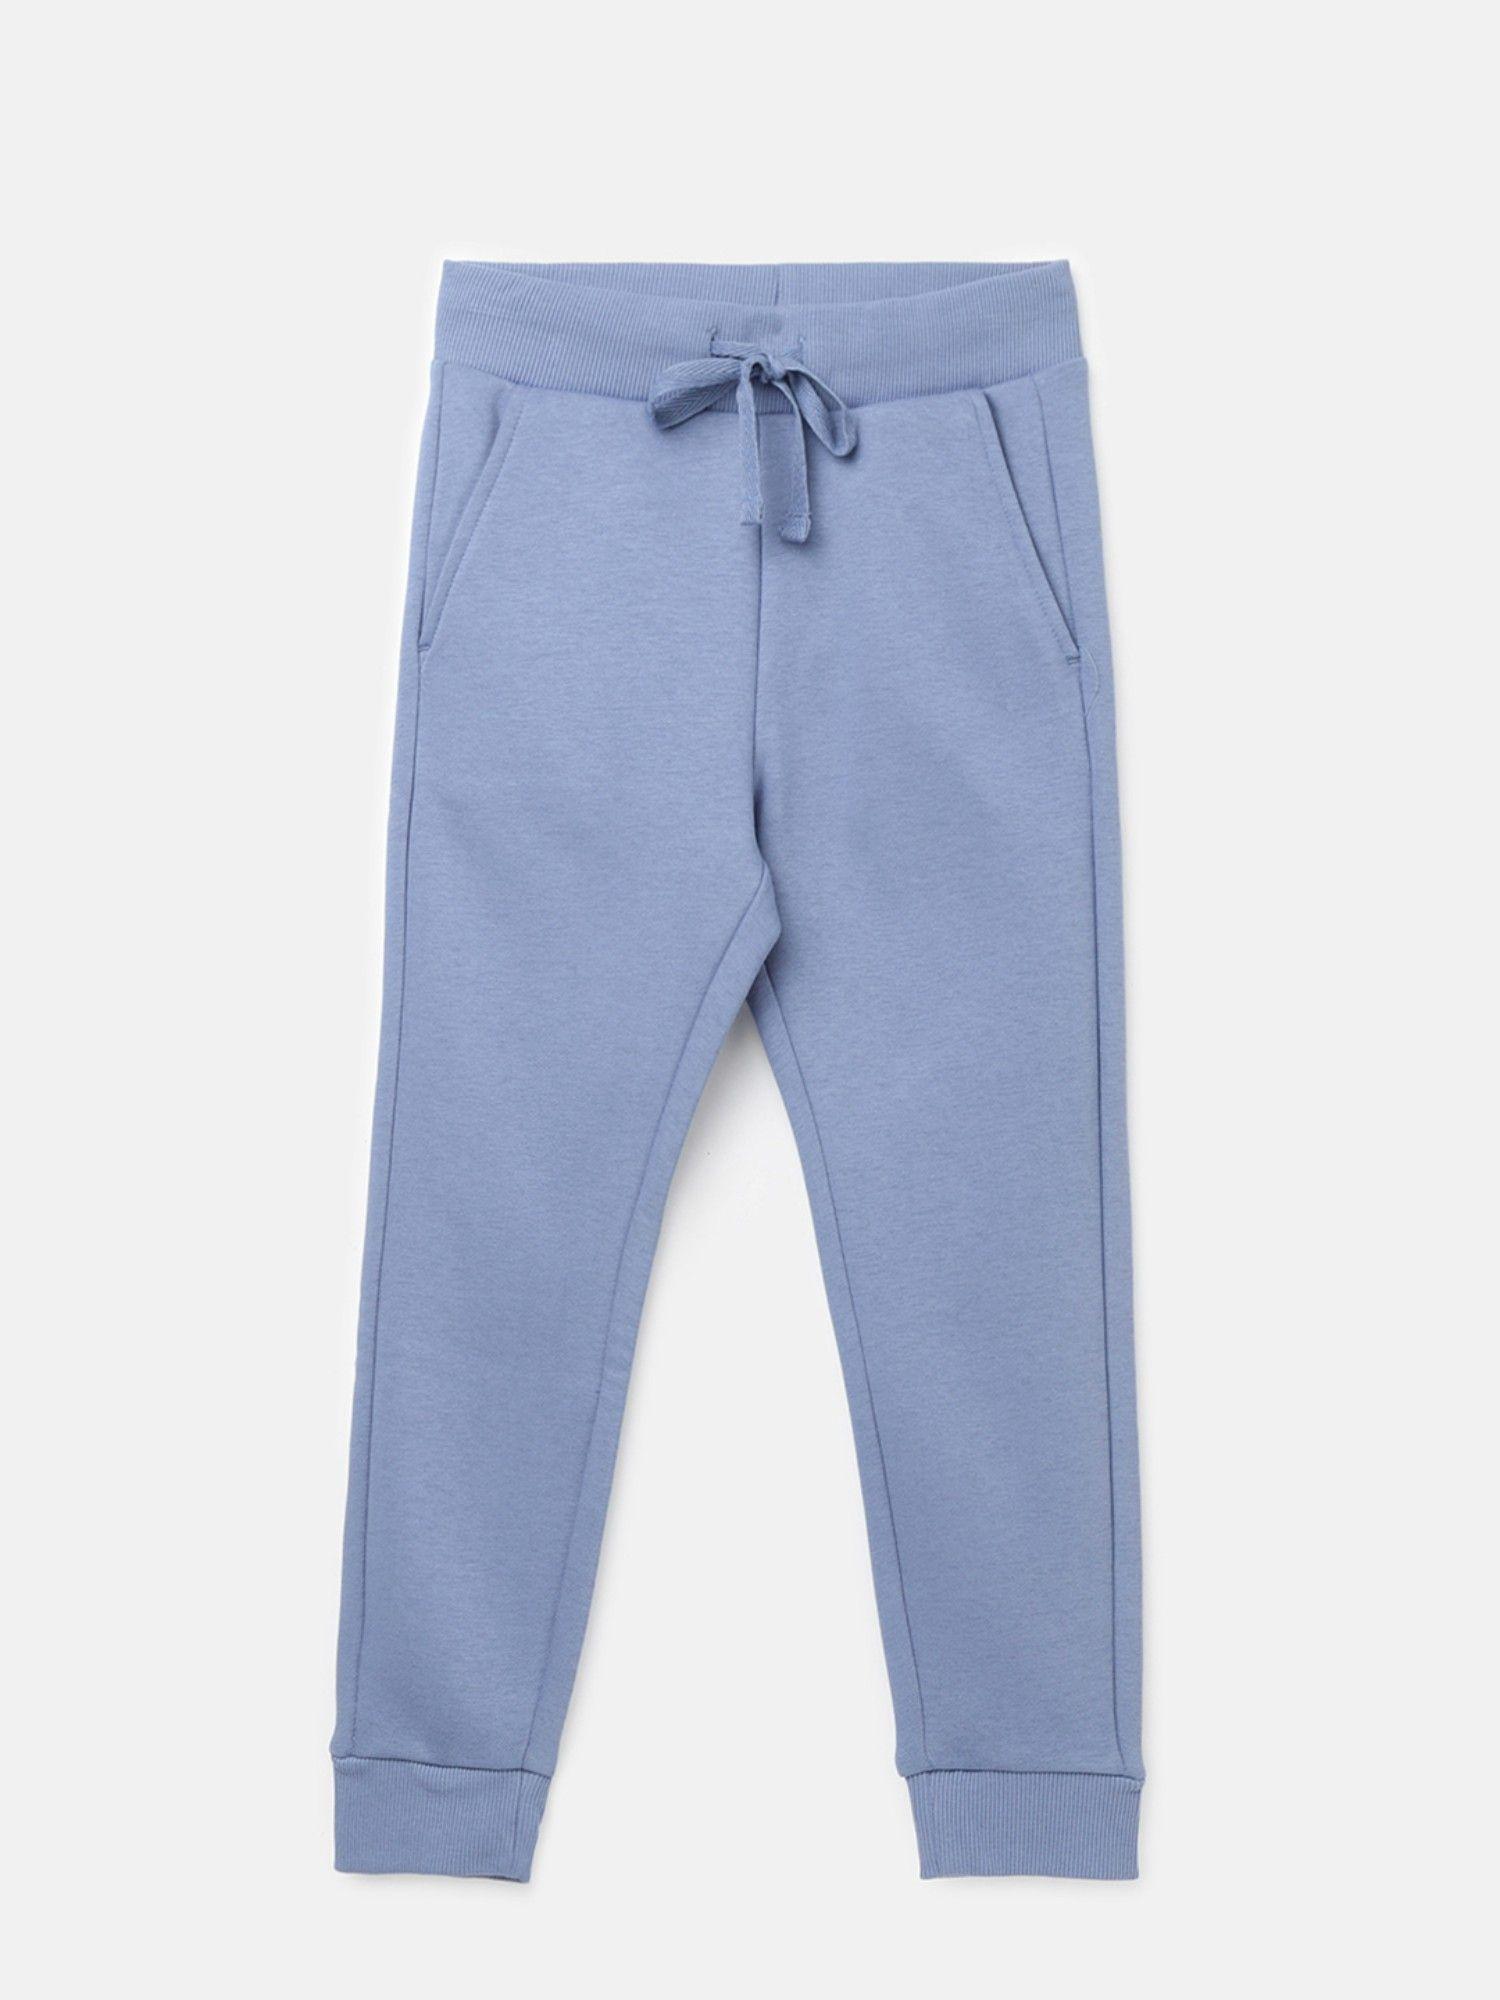 blue boys solid regular fit joggers with drawstring closure